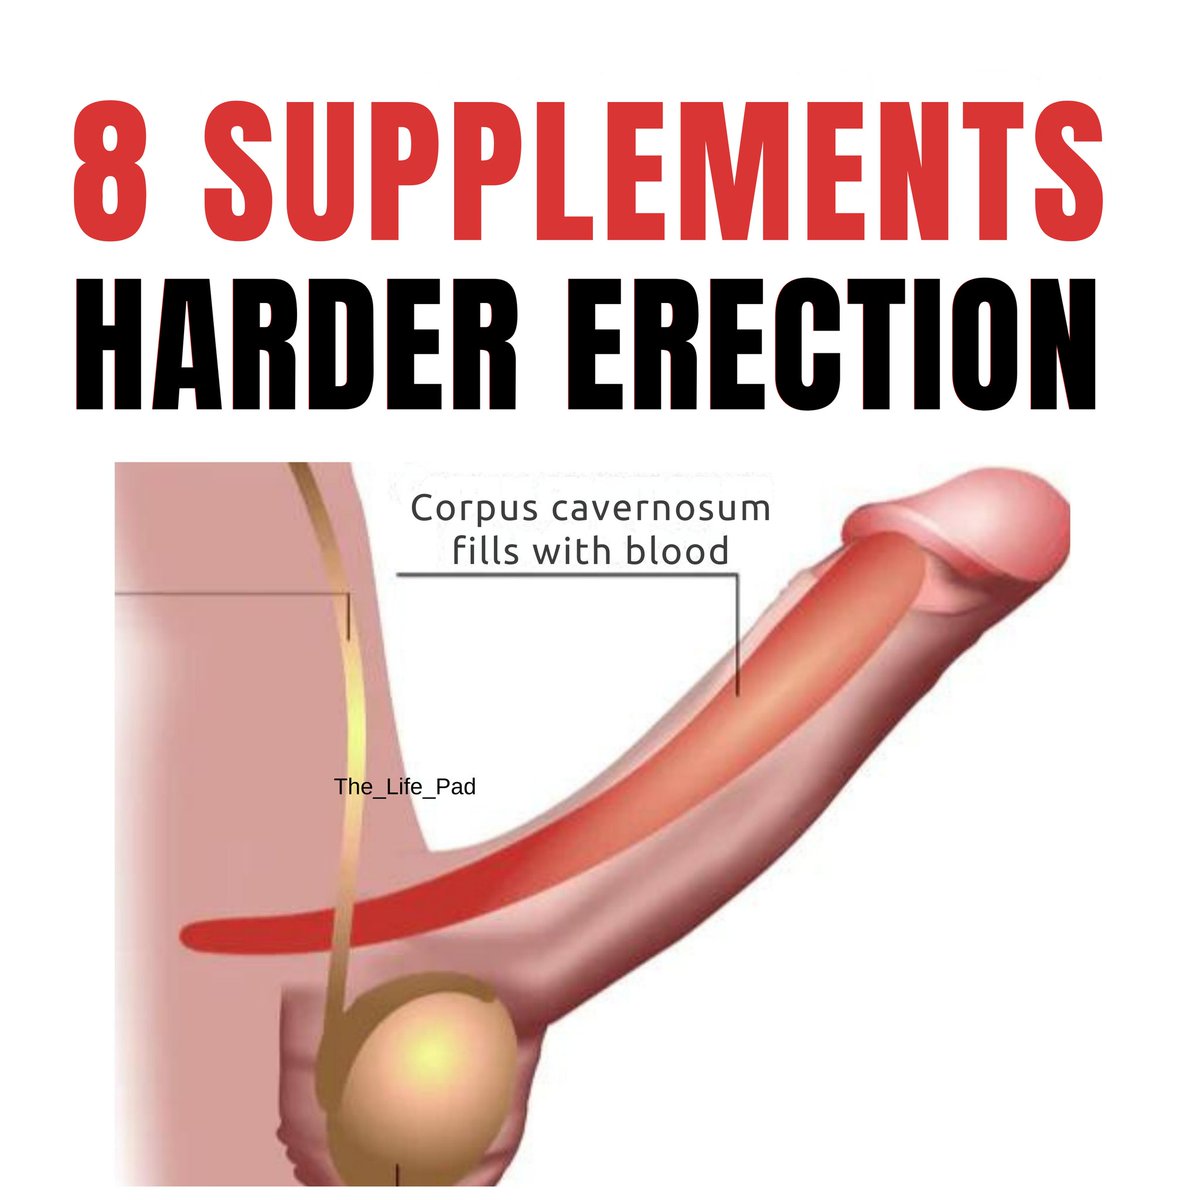 8 Supplements To Get Harder & Get Even Better In Bed: 🍆 Save this 👇✅💯